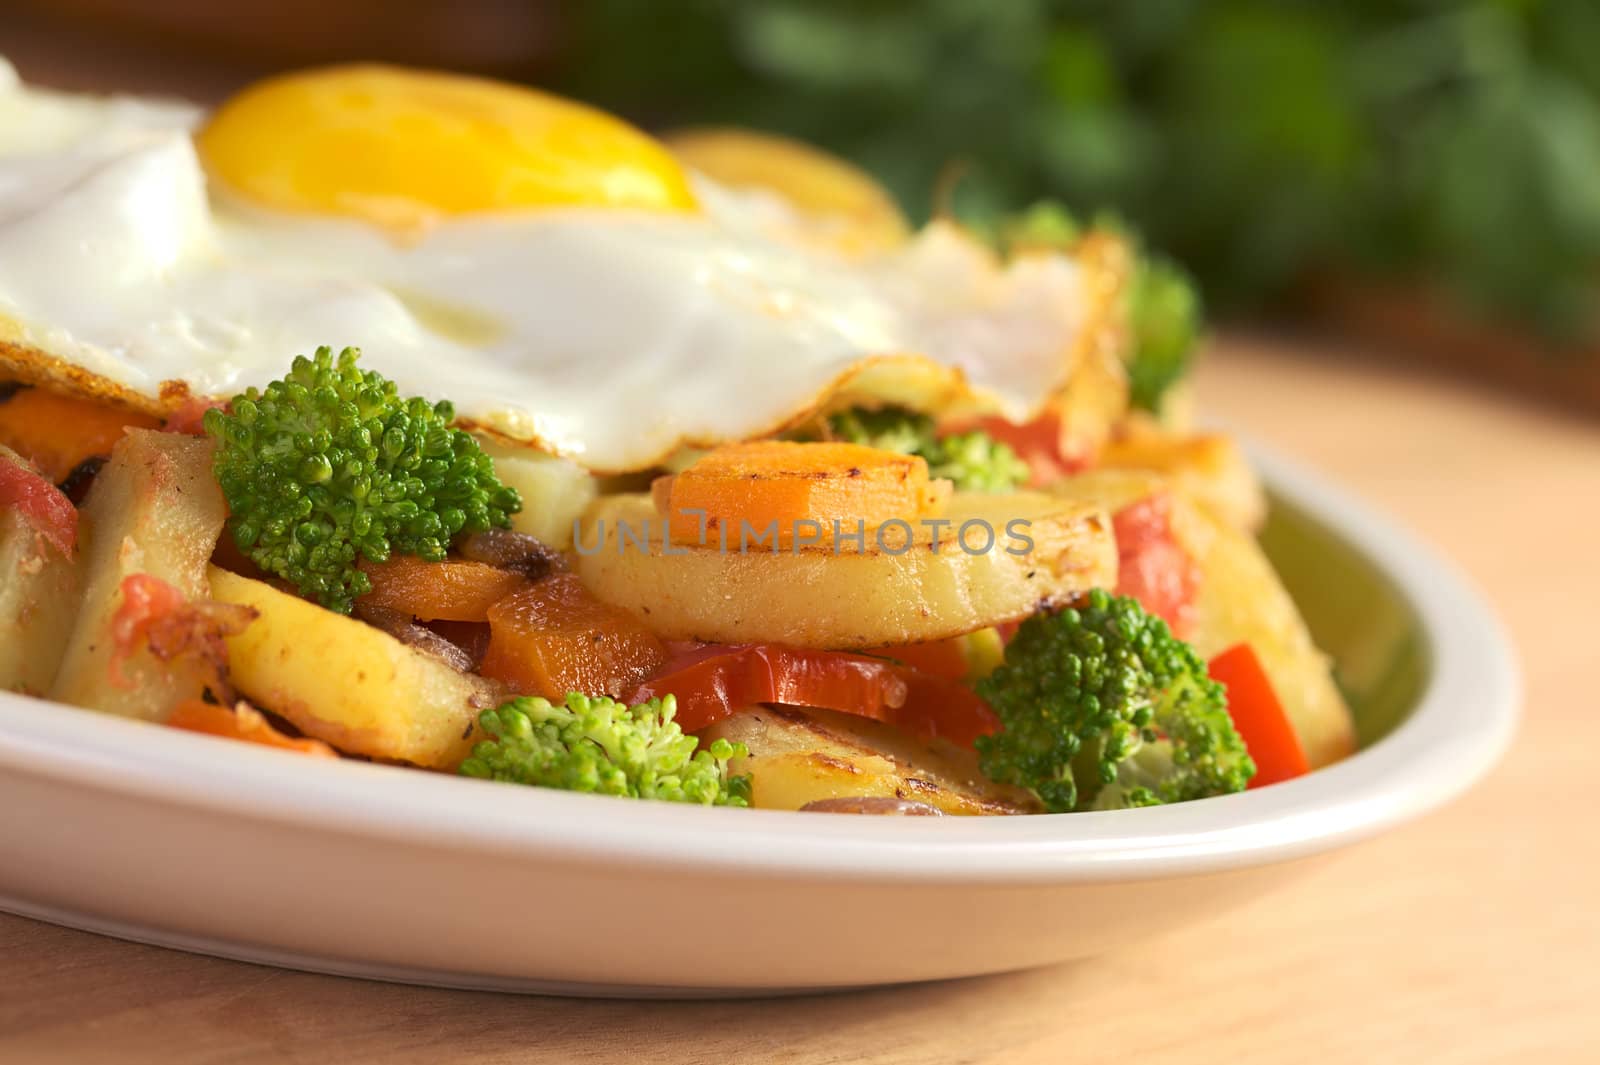 Fried potatoes, tomato, broccoli, onion, carrot with a fried egg on top (Selective Focus, Focus on the broccoli on the left)